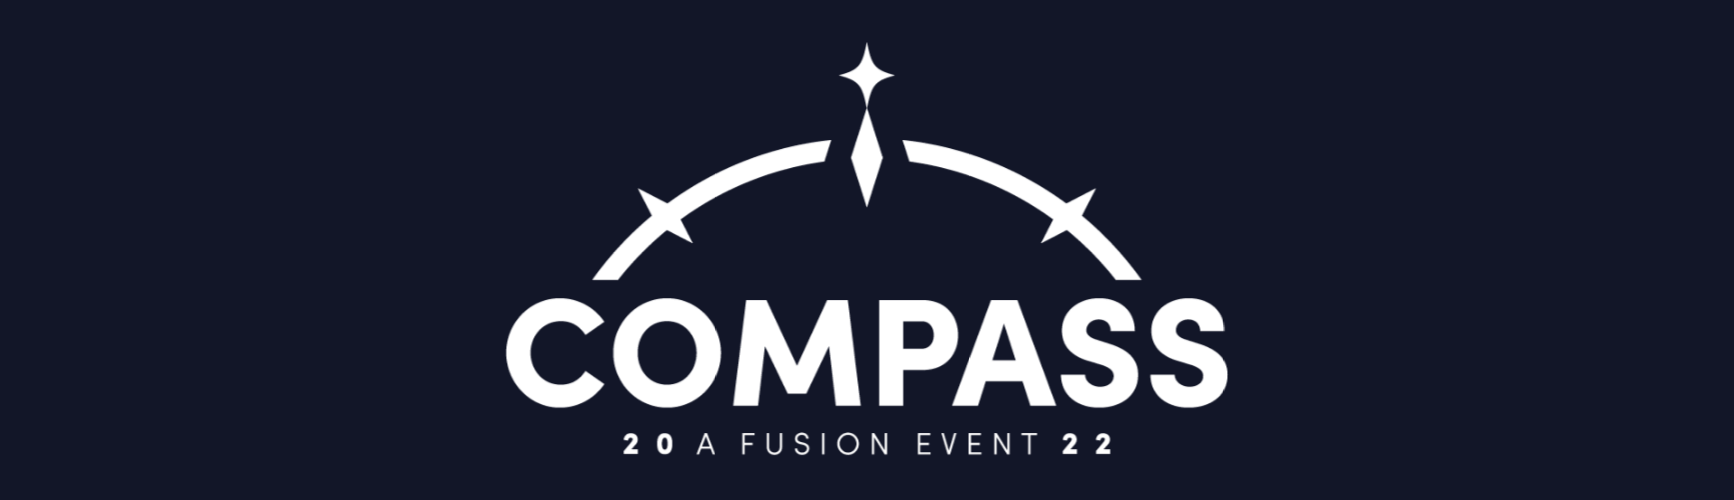 Compass Email Banner for Pardot - Fusion Risk Management